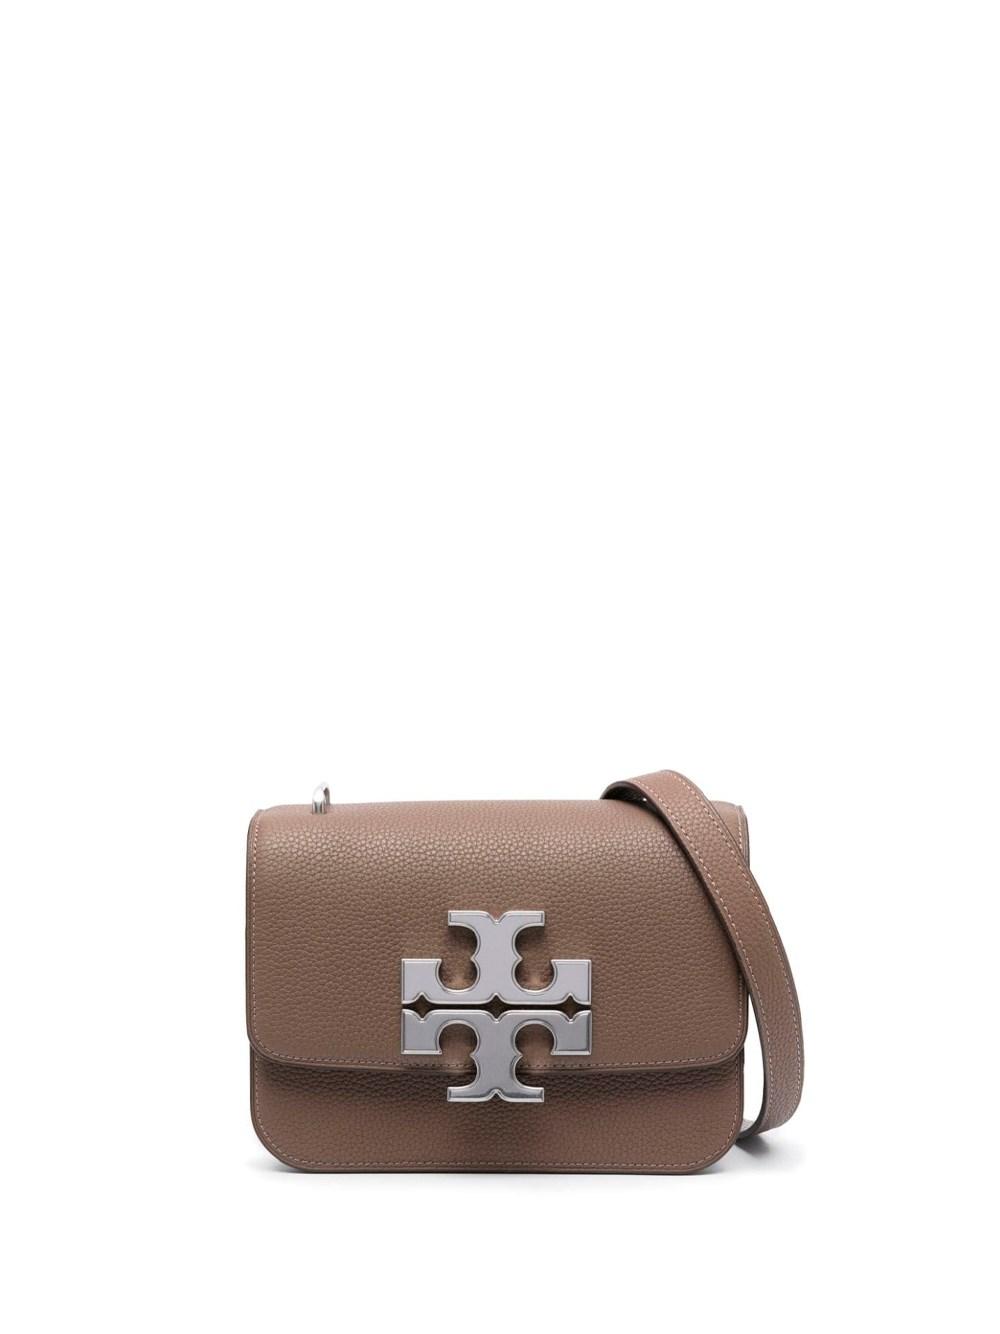 Tory Burch `eleanor Pebbled` Small Leather Convertible Shoulder Bag in